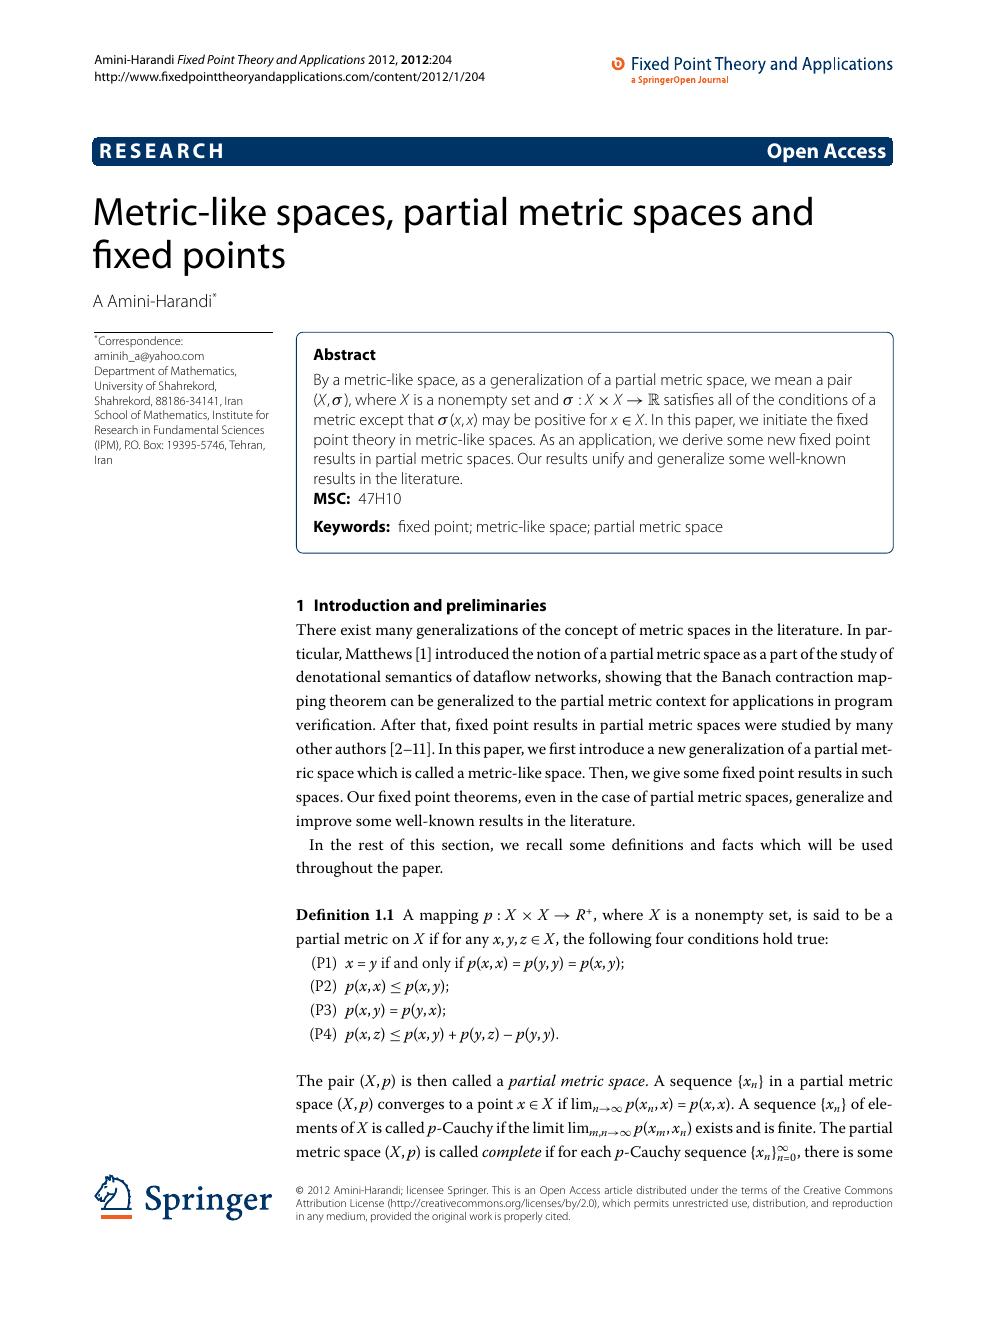 Metric Like Spaces Partial Metric Spaces And Fixed Points Topic Of Research Paper In Mathematics Download Scholarly Article Pdf And Read For Free On Cyberleninka Open Science Hub